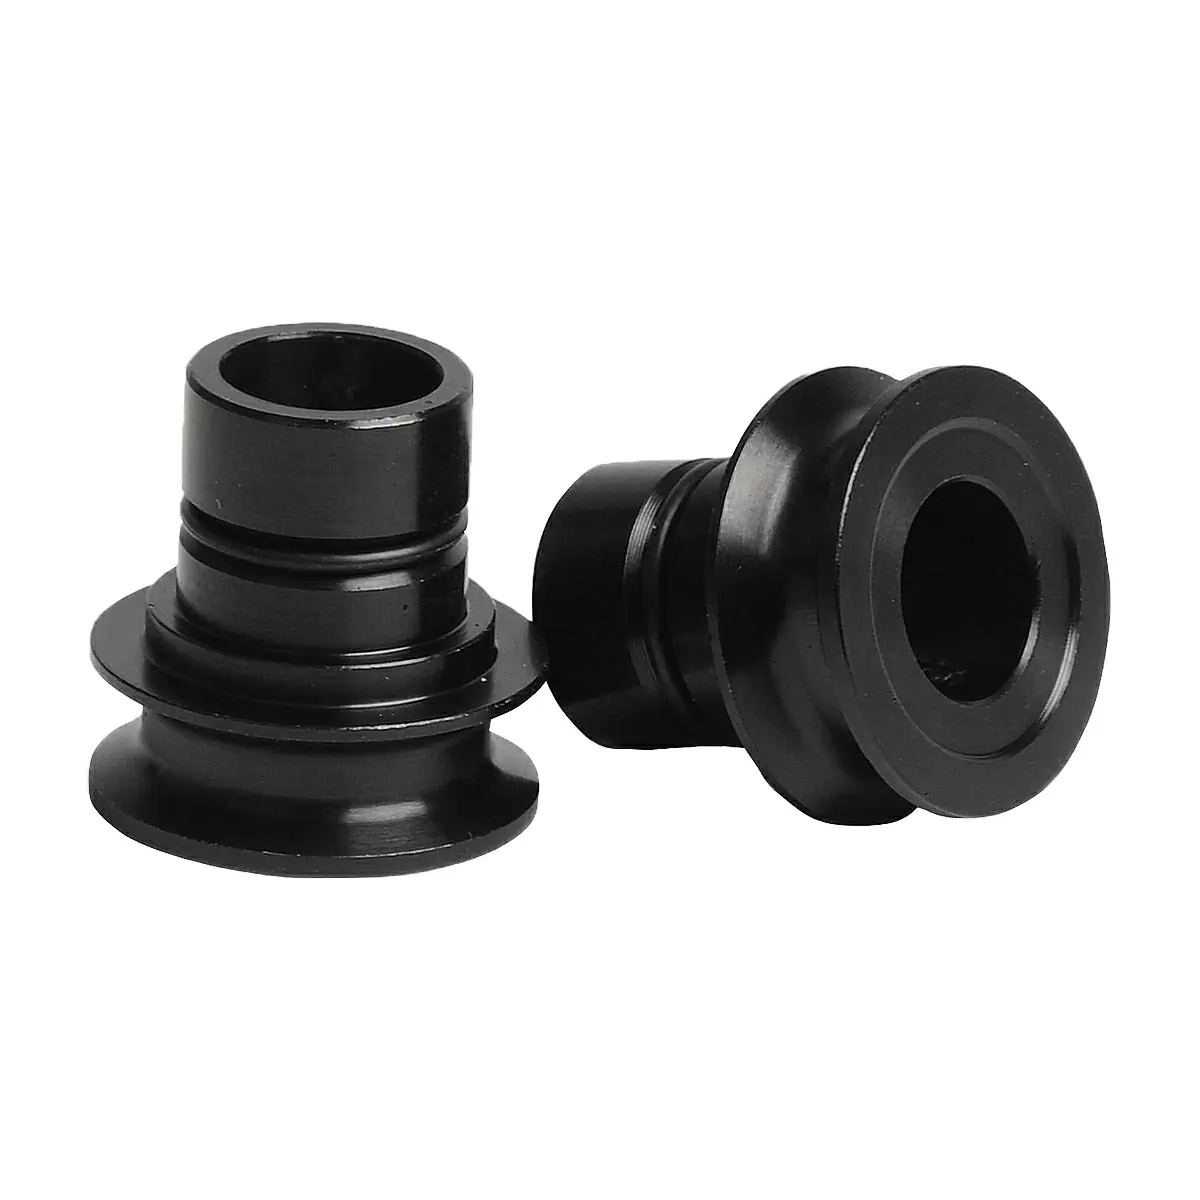 Front Hub End caps 15x110mm for Pro 4/Pro 2 EVO hubs - image